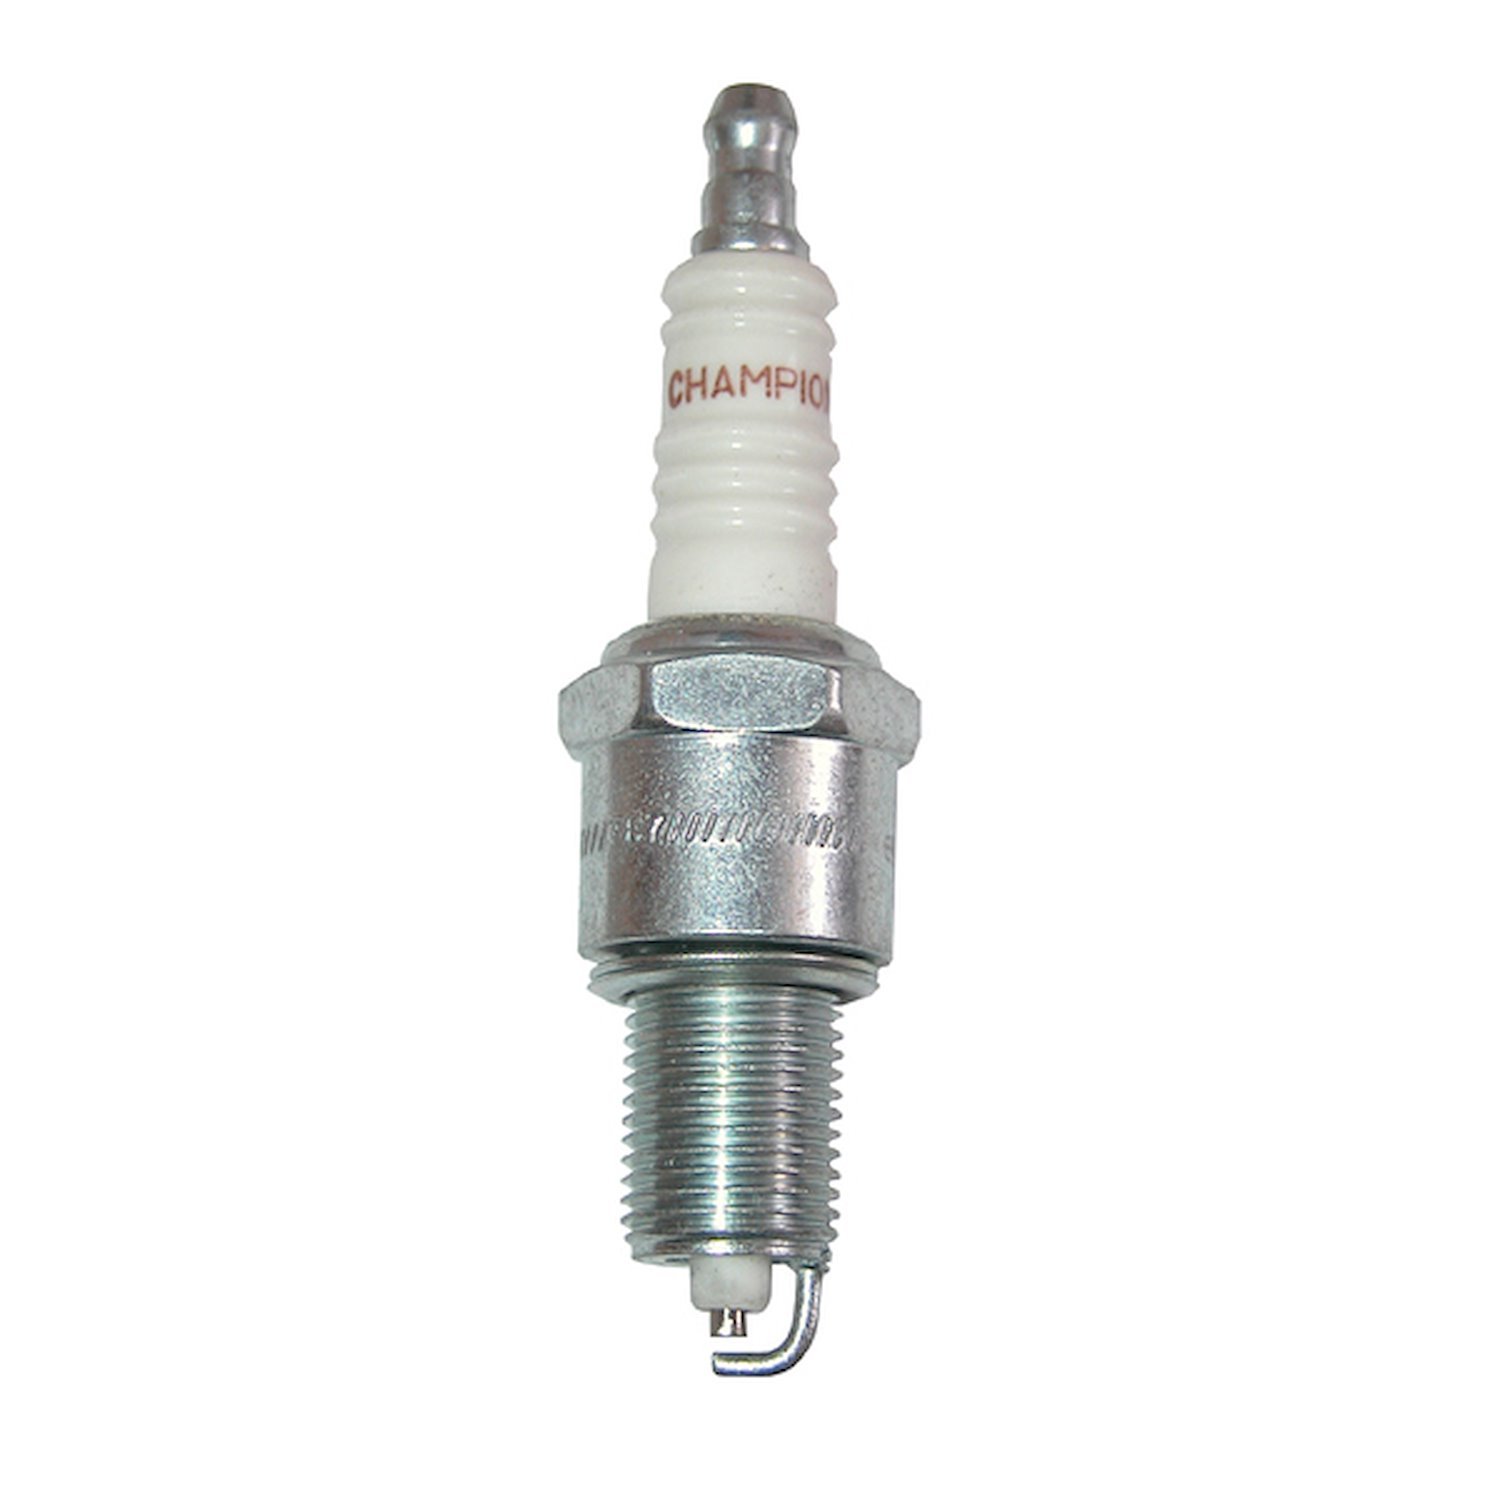 Spark Plug, Champion Brand for Select 1991-1997 Jeep Models w/ 2.5L, 4.0L or 5.2L Engines